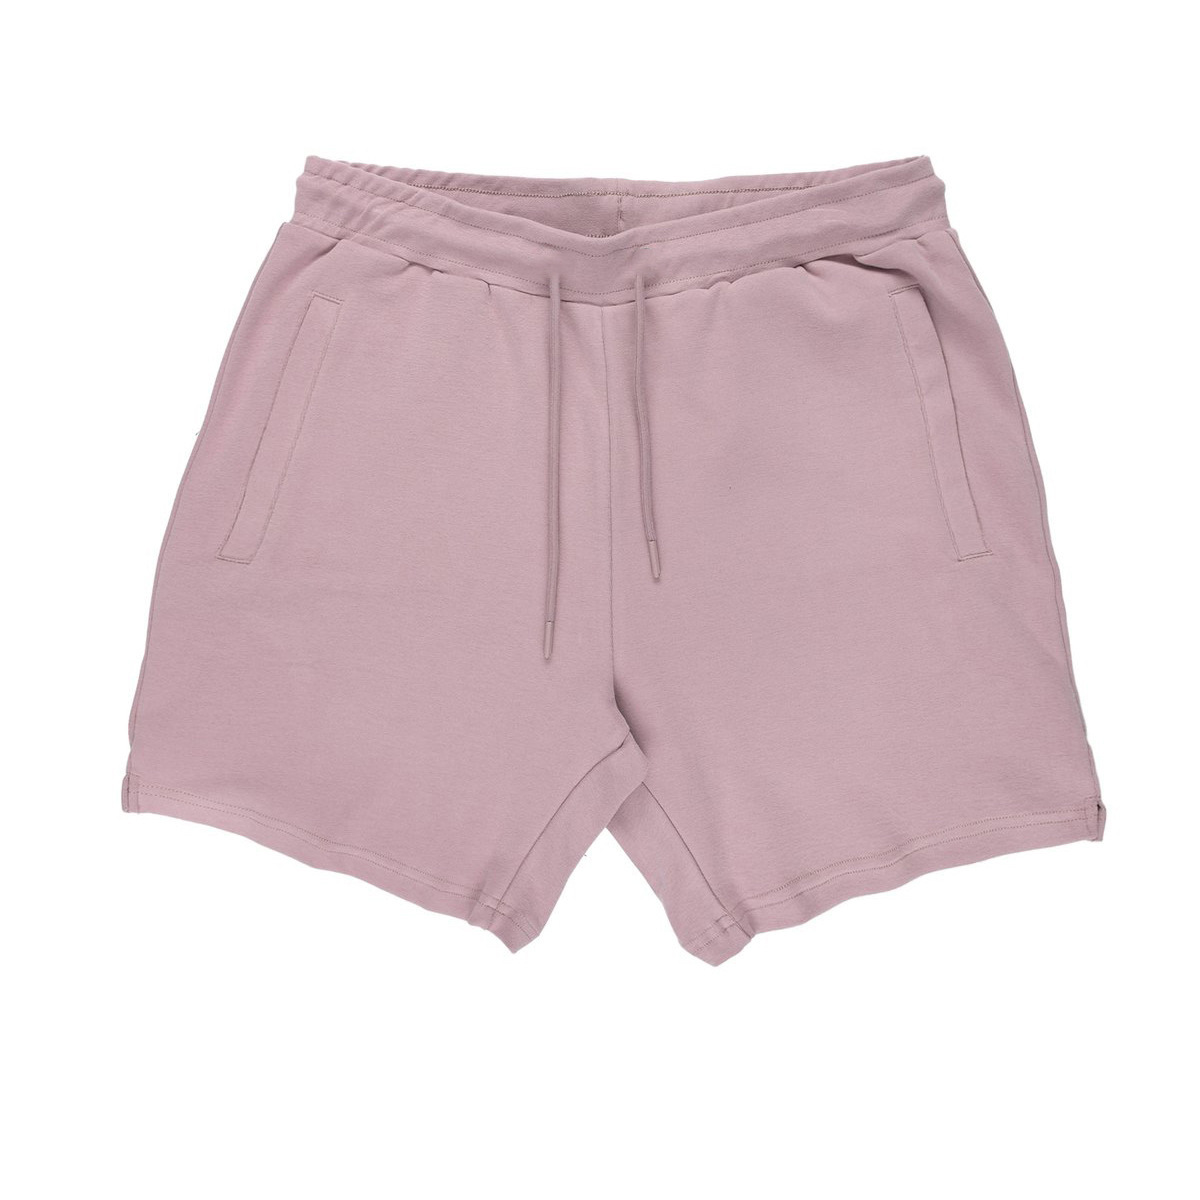 Men's Athletic Fitness Shorts for Running and Casual Wear